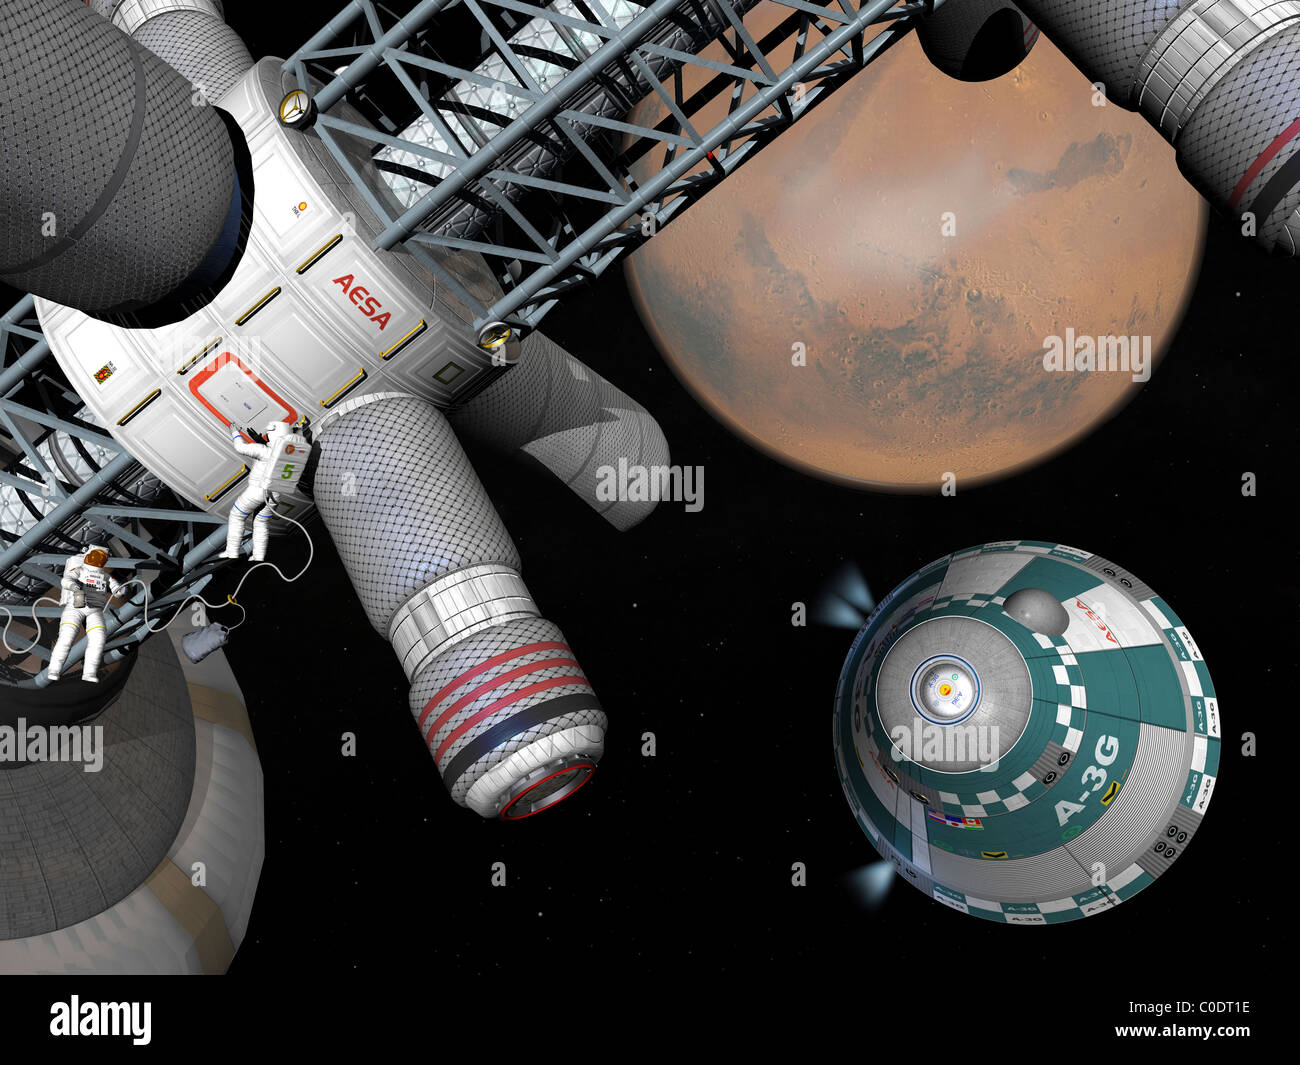 Artist's concept of a future space exploration mission. Stock Photo